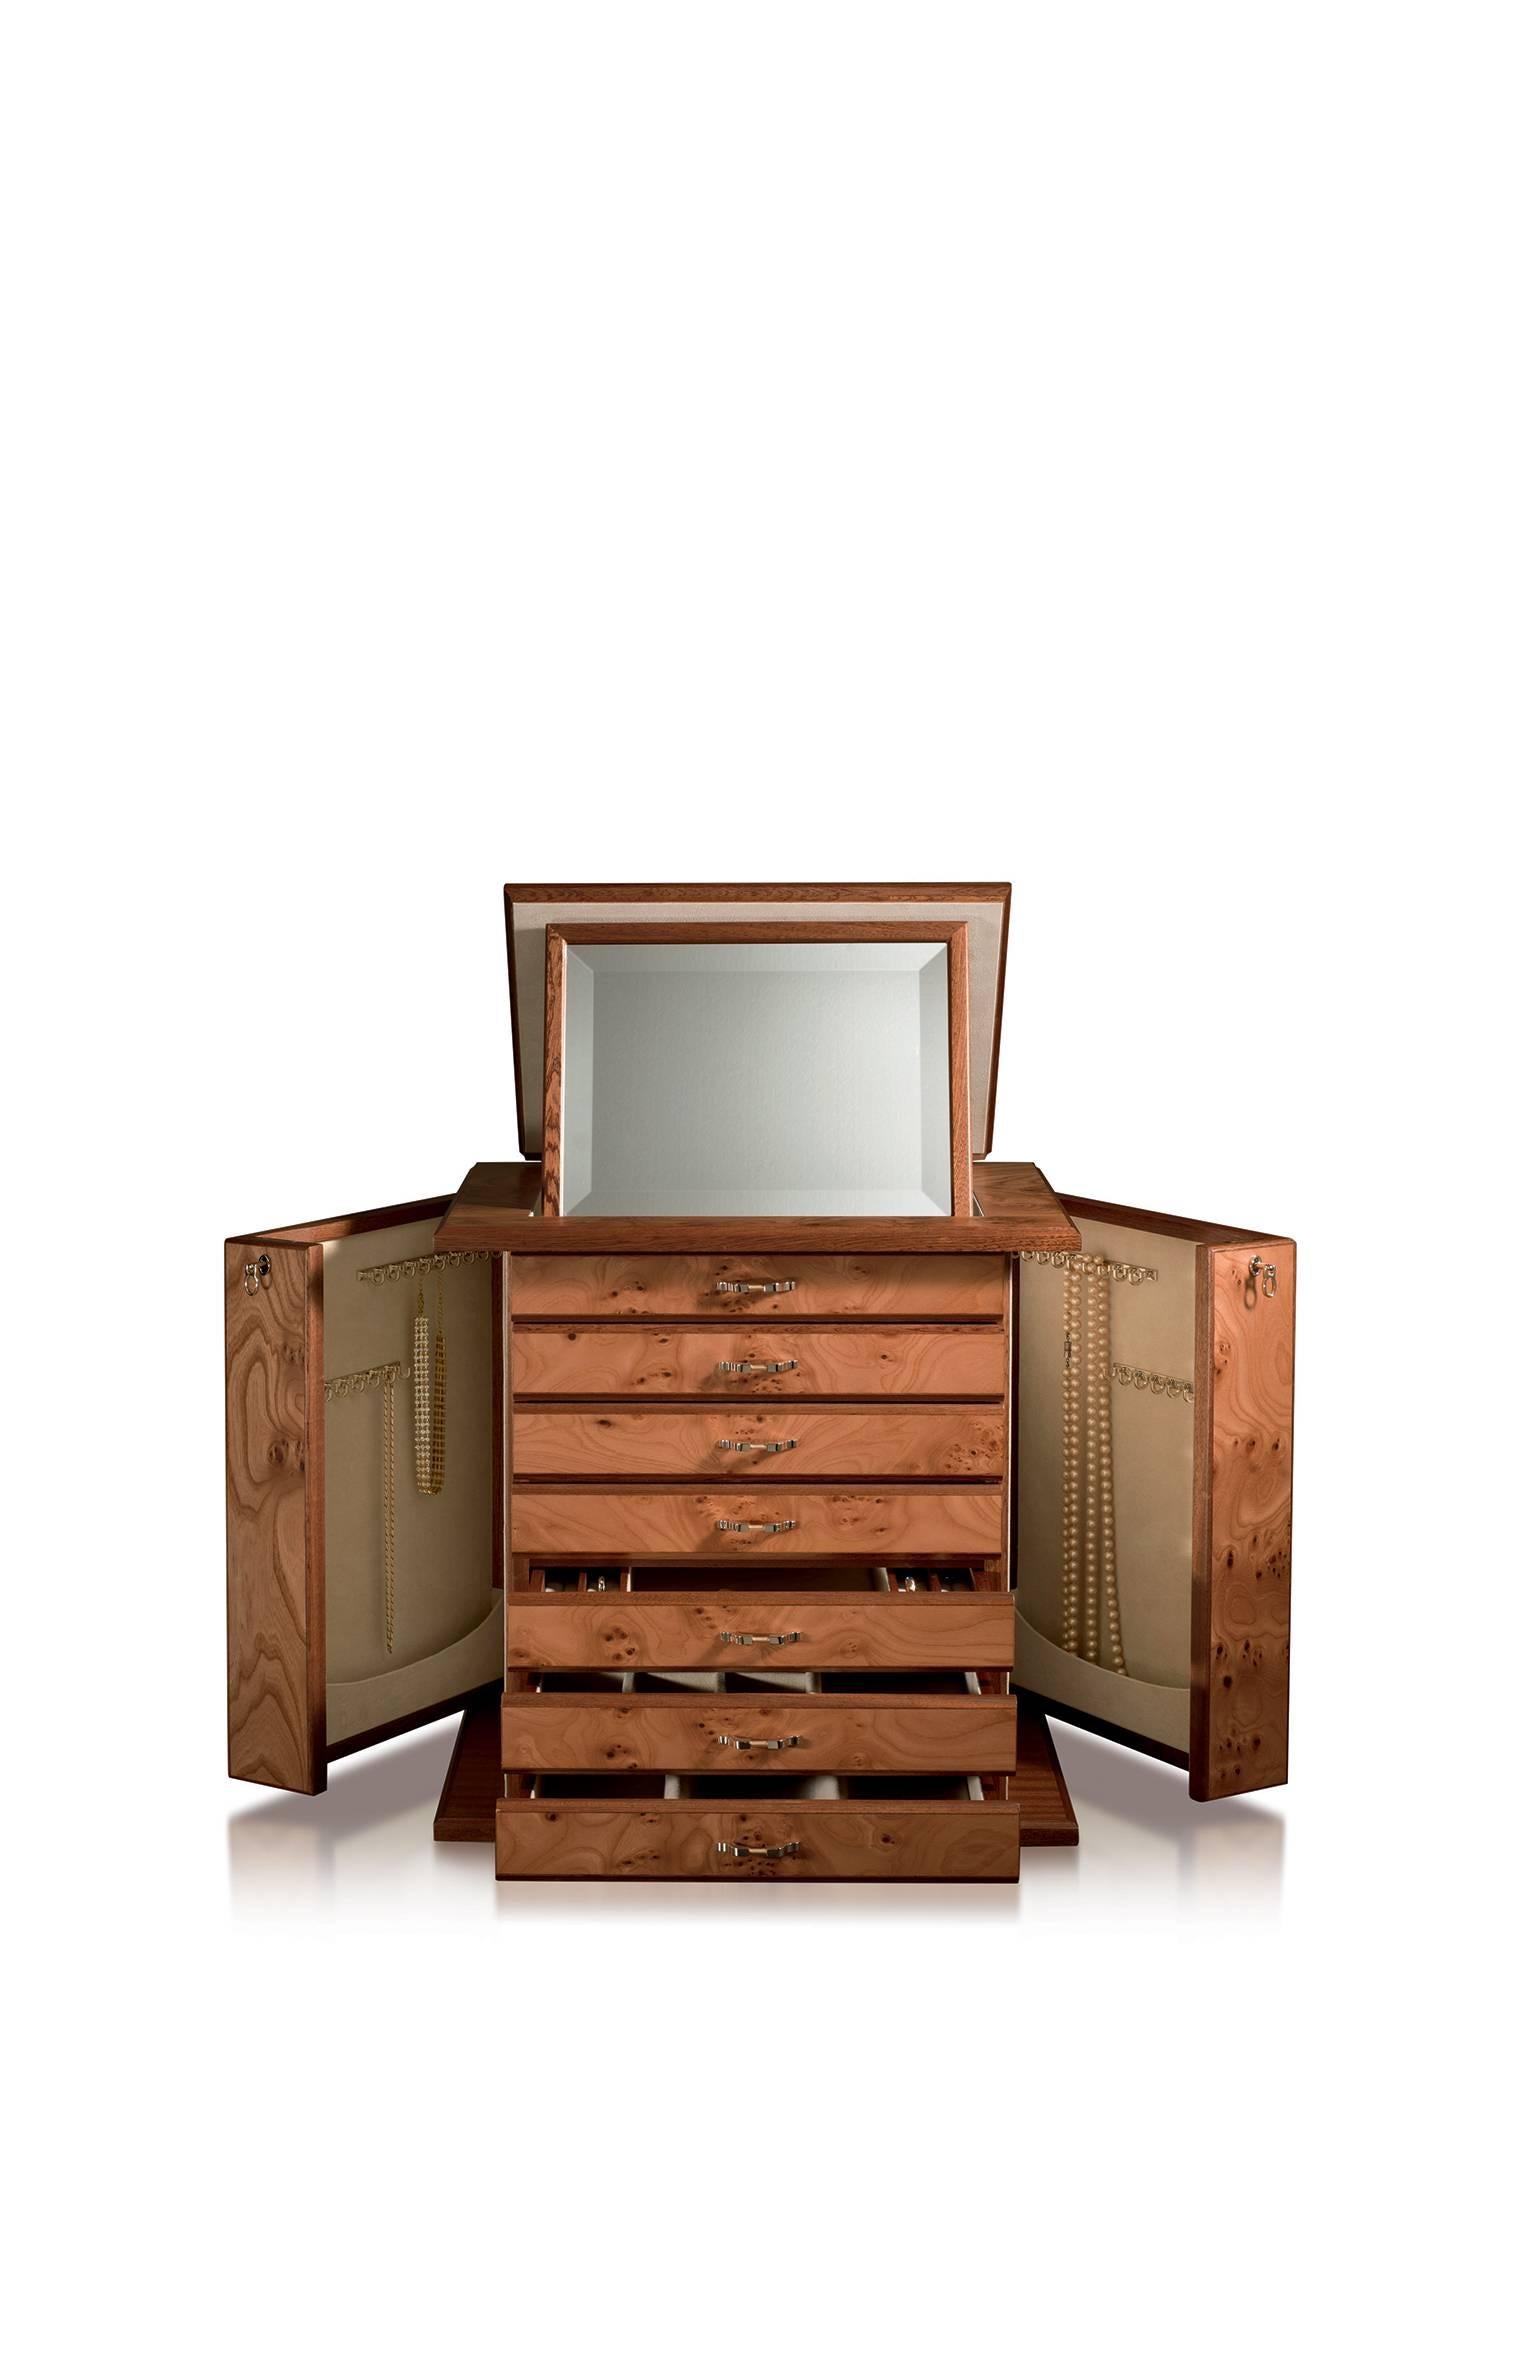 Jewelry chest in elm briar and mahogany, matte finish, ultrasuede lining. 24-karats gold plated brass accessories, with necklace bars, lockable doors and six drawers. Adjustable mirror on top part.